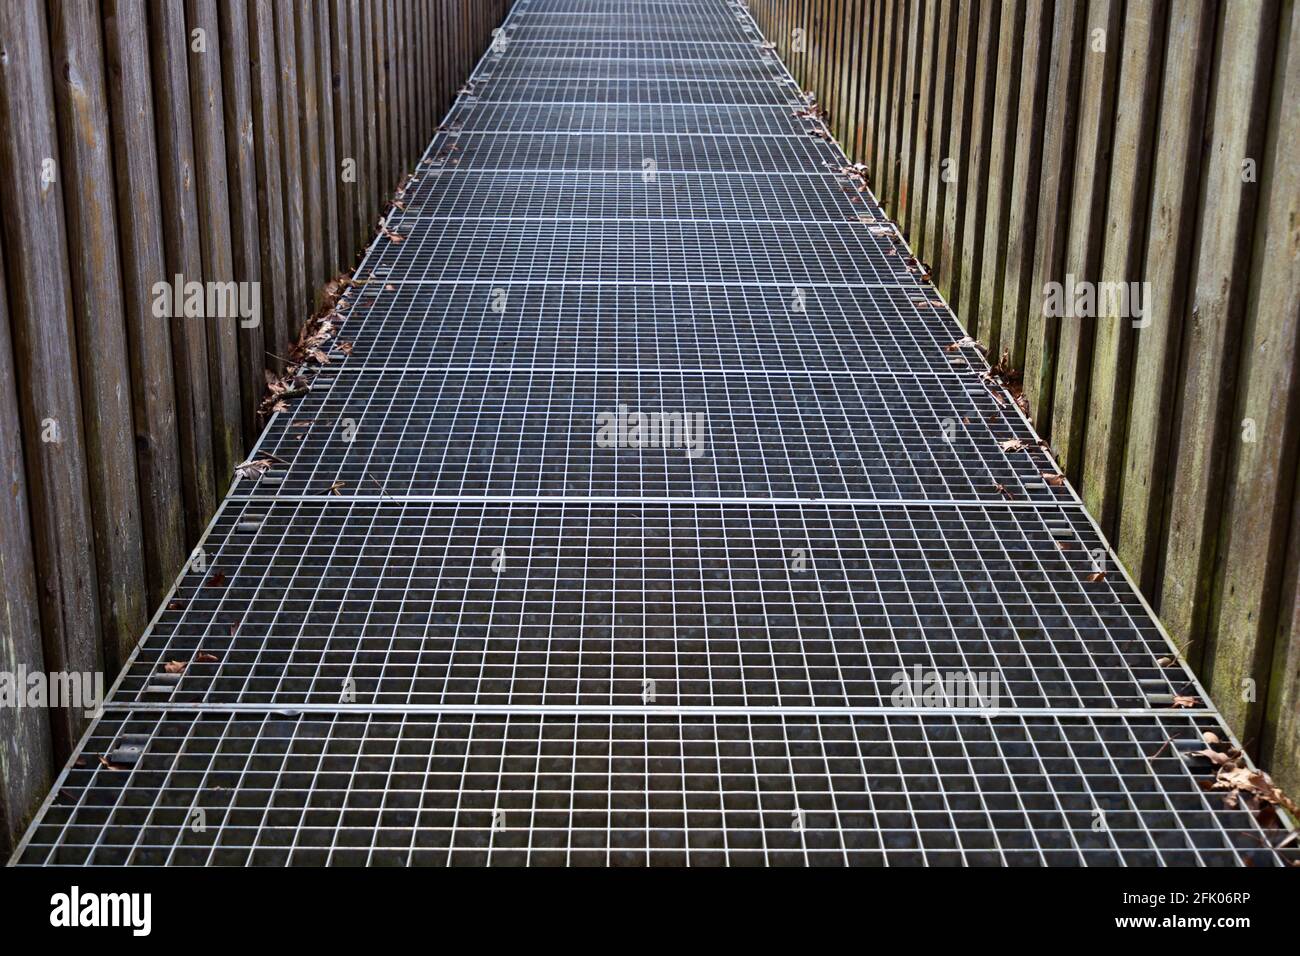 Footbridge with iron grating floor and wooden railing crossing a river Stock Photo